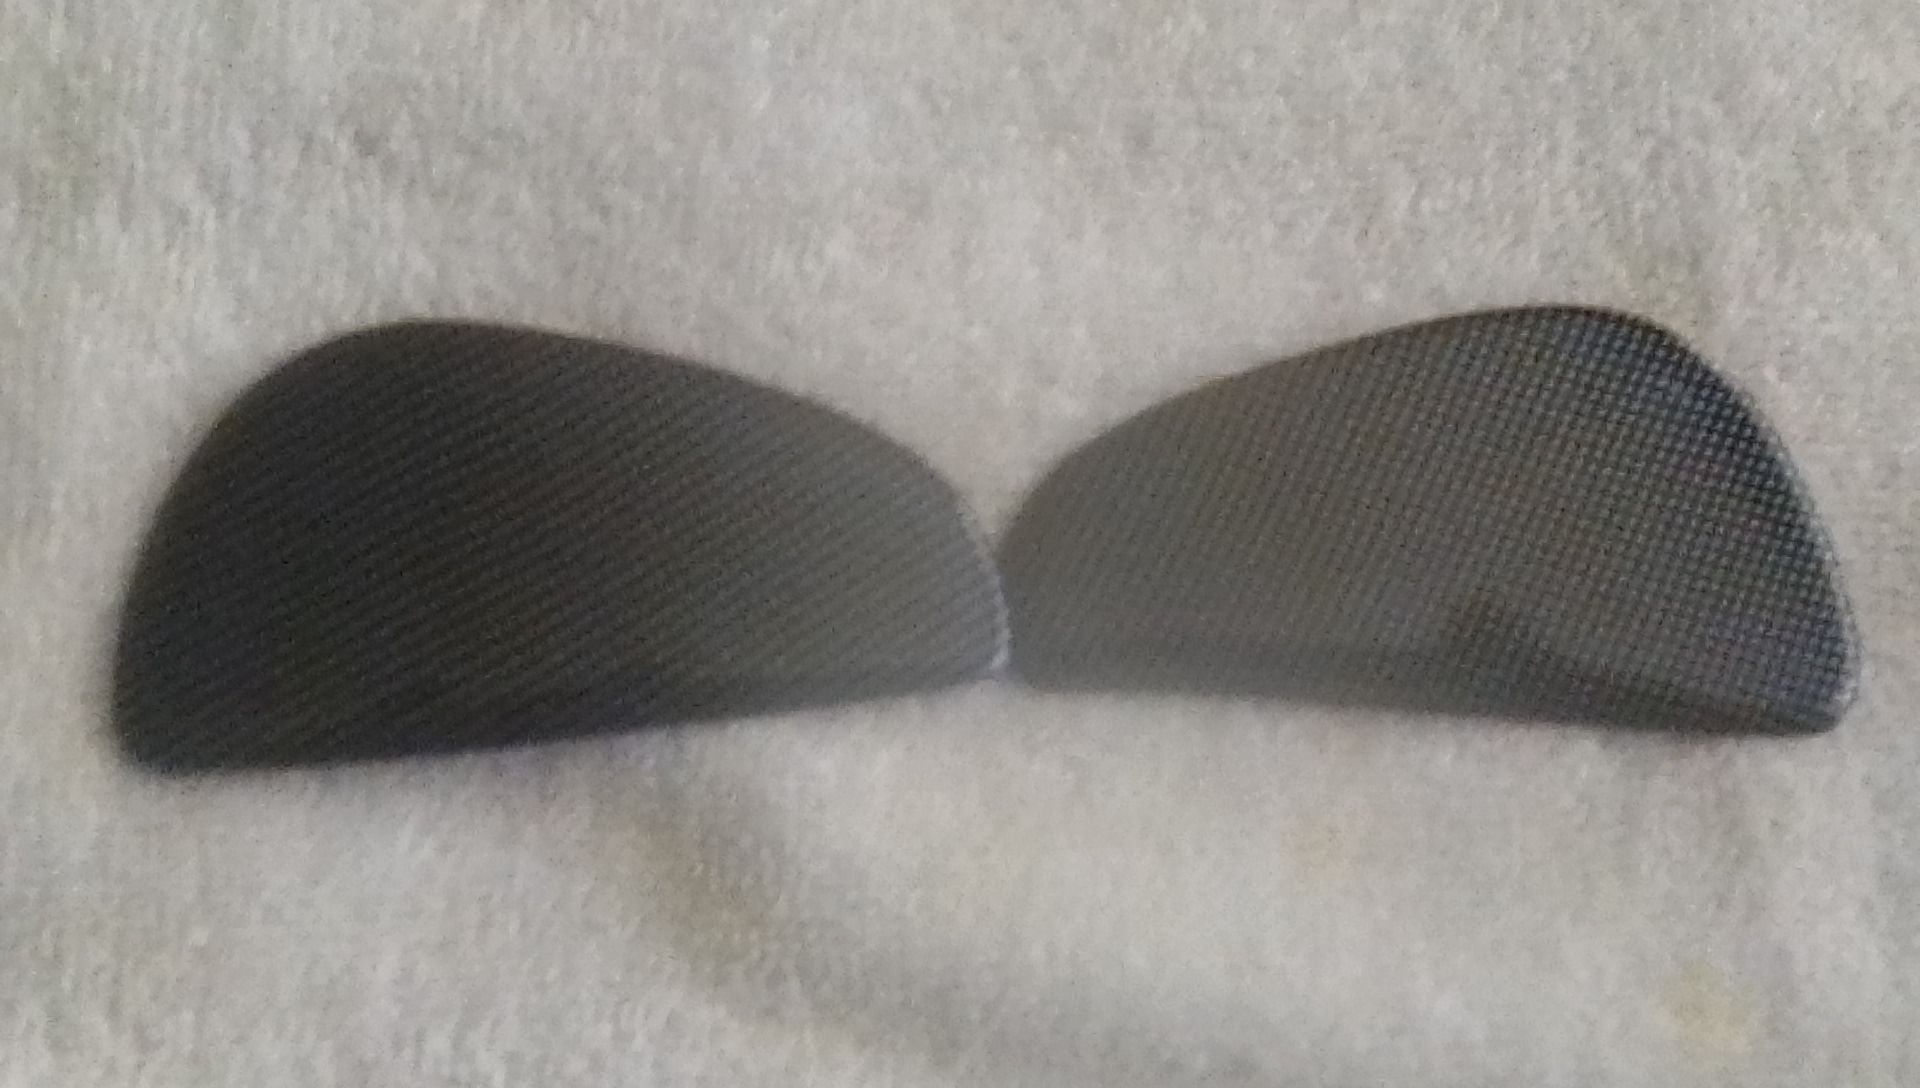 Accessories - FD - Carbon Fiber look door handle covers - Used - 1993 to 2002 Mazda RX-7 - San Jose, CA 95121, United States